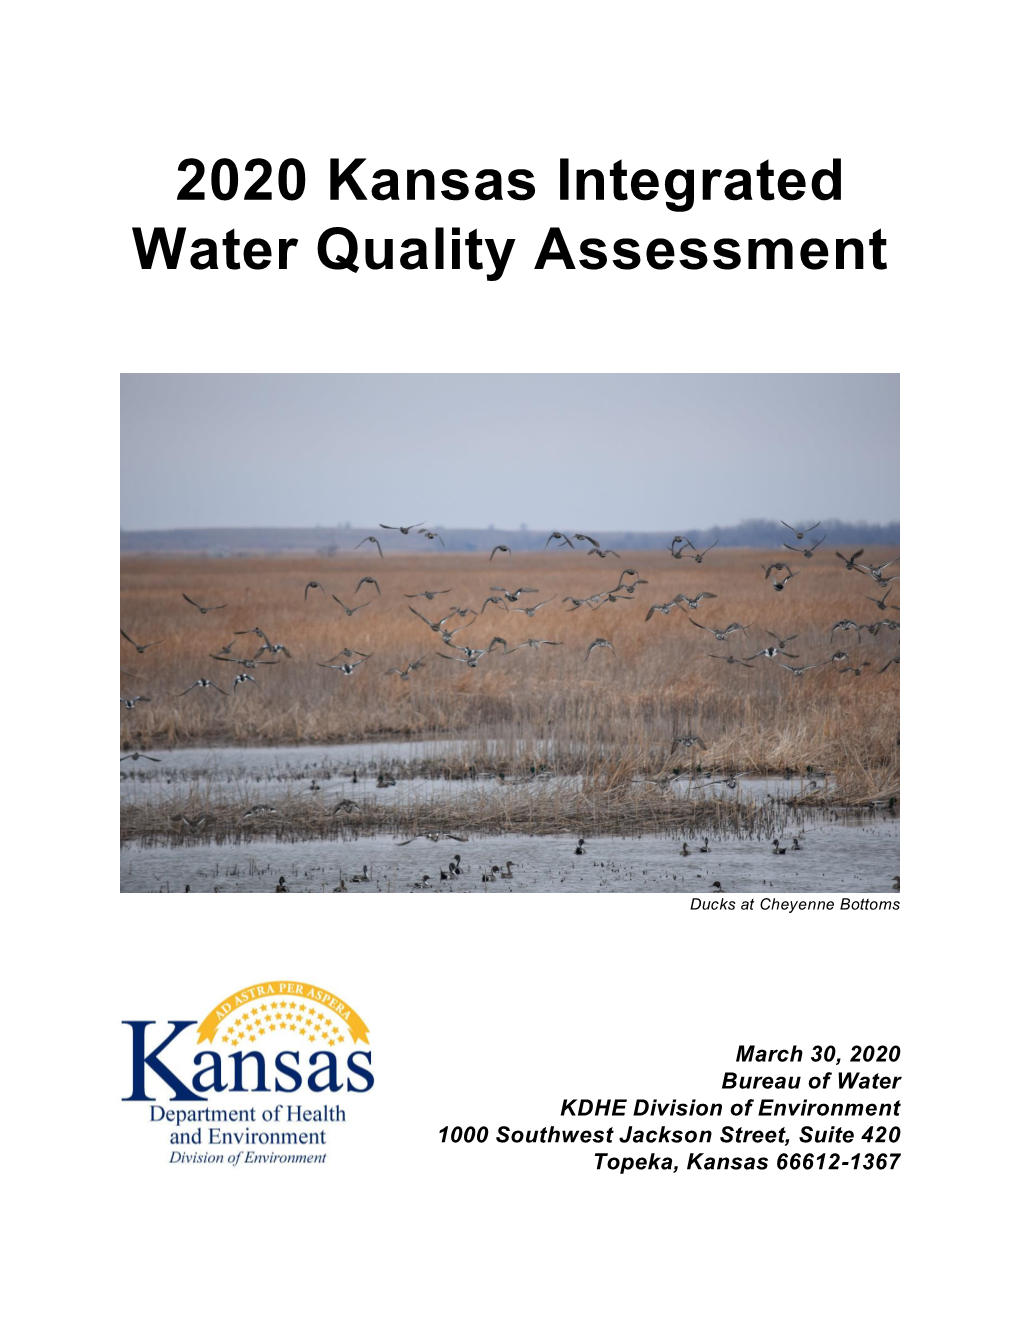 2020 Kansas Integrated Water Quality Assessment